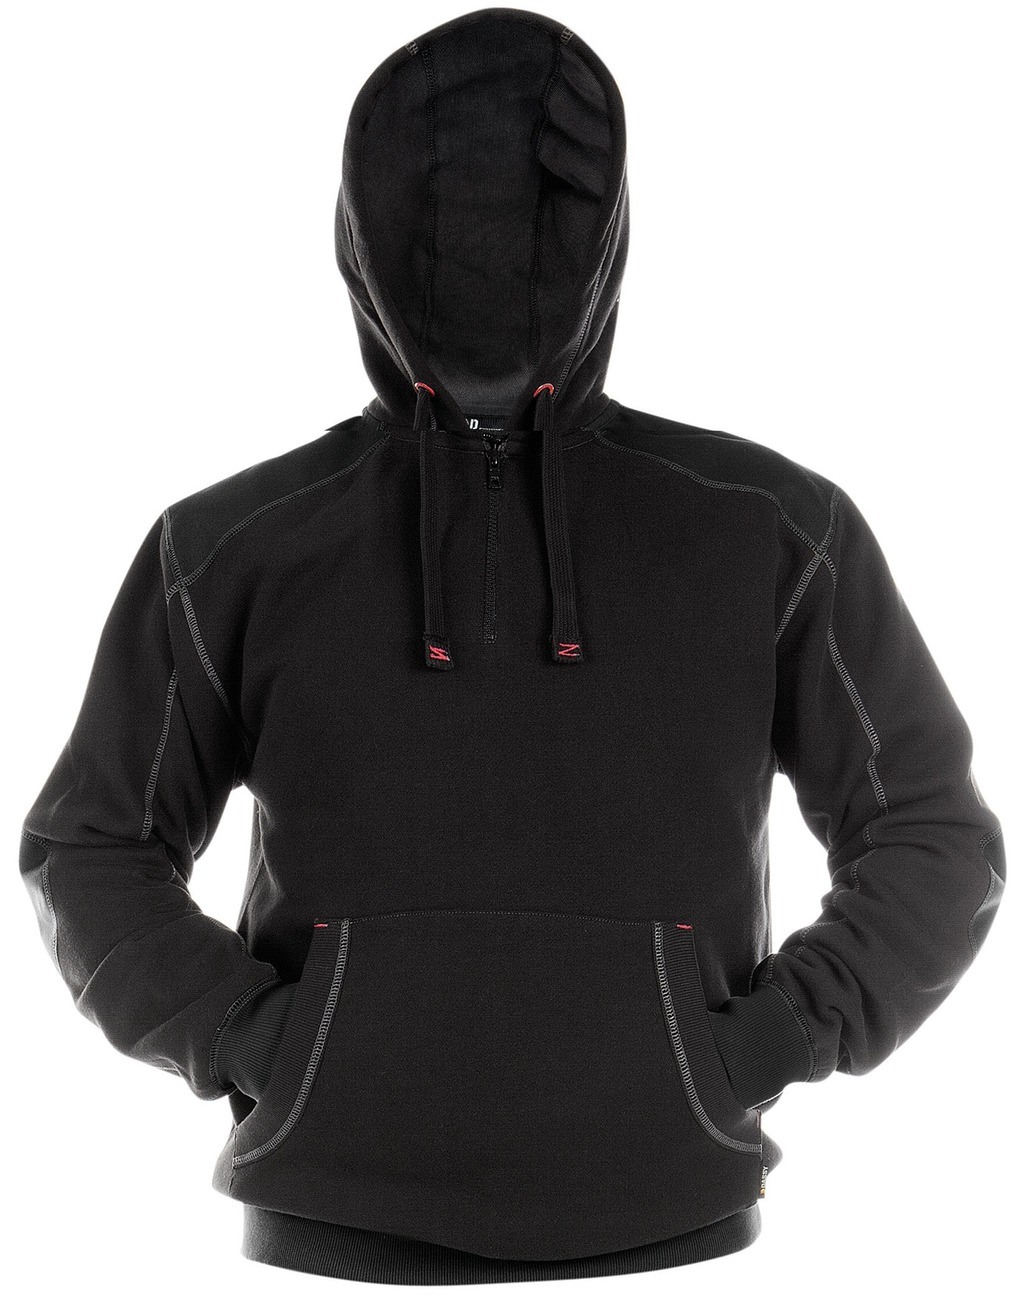 INDY Hooded sweater